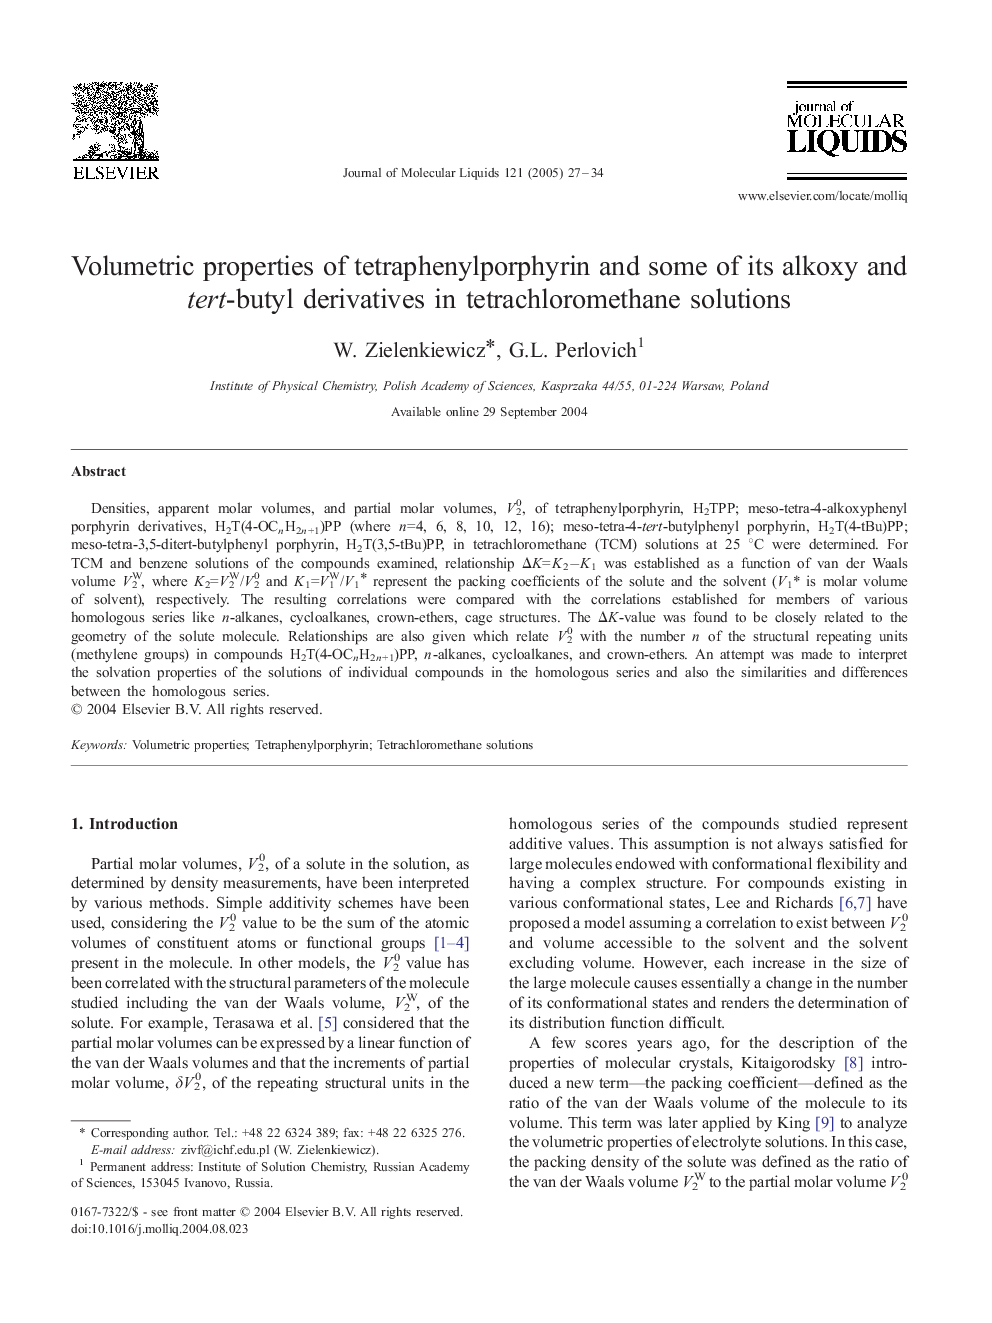 Volumetric properties of tetraphenylporphyrin and some of its alkoxy and tert-butyl derivatives in tetrachloromethane solutions